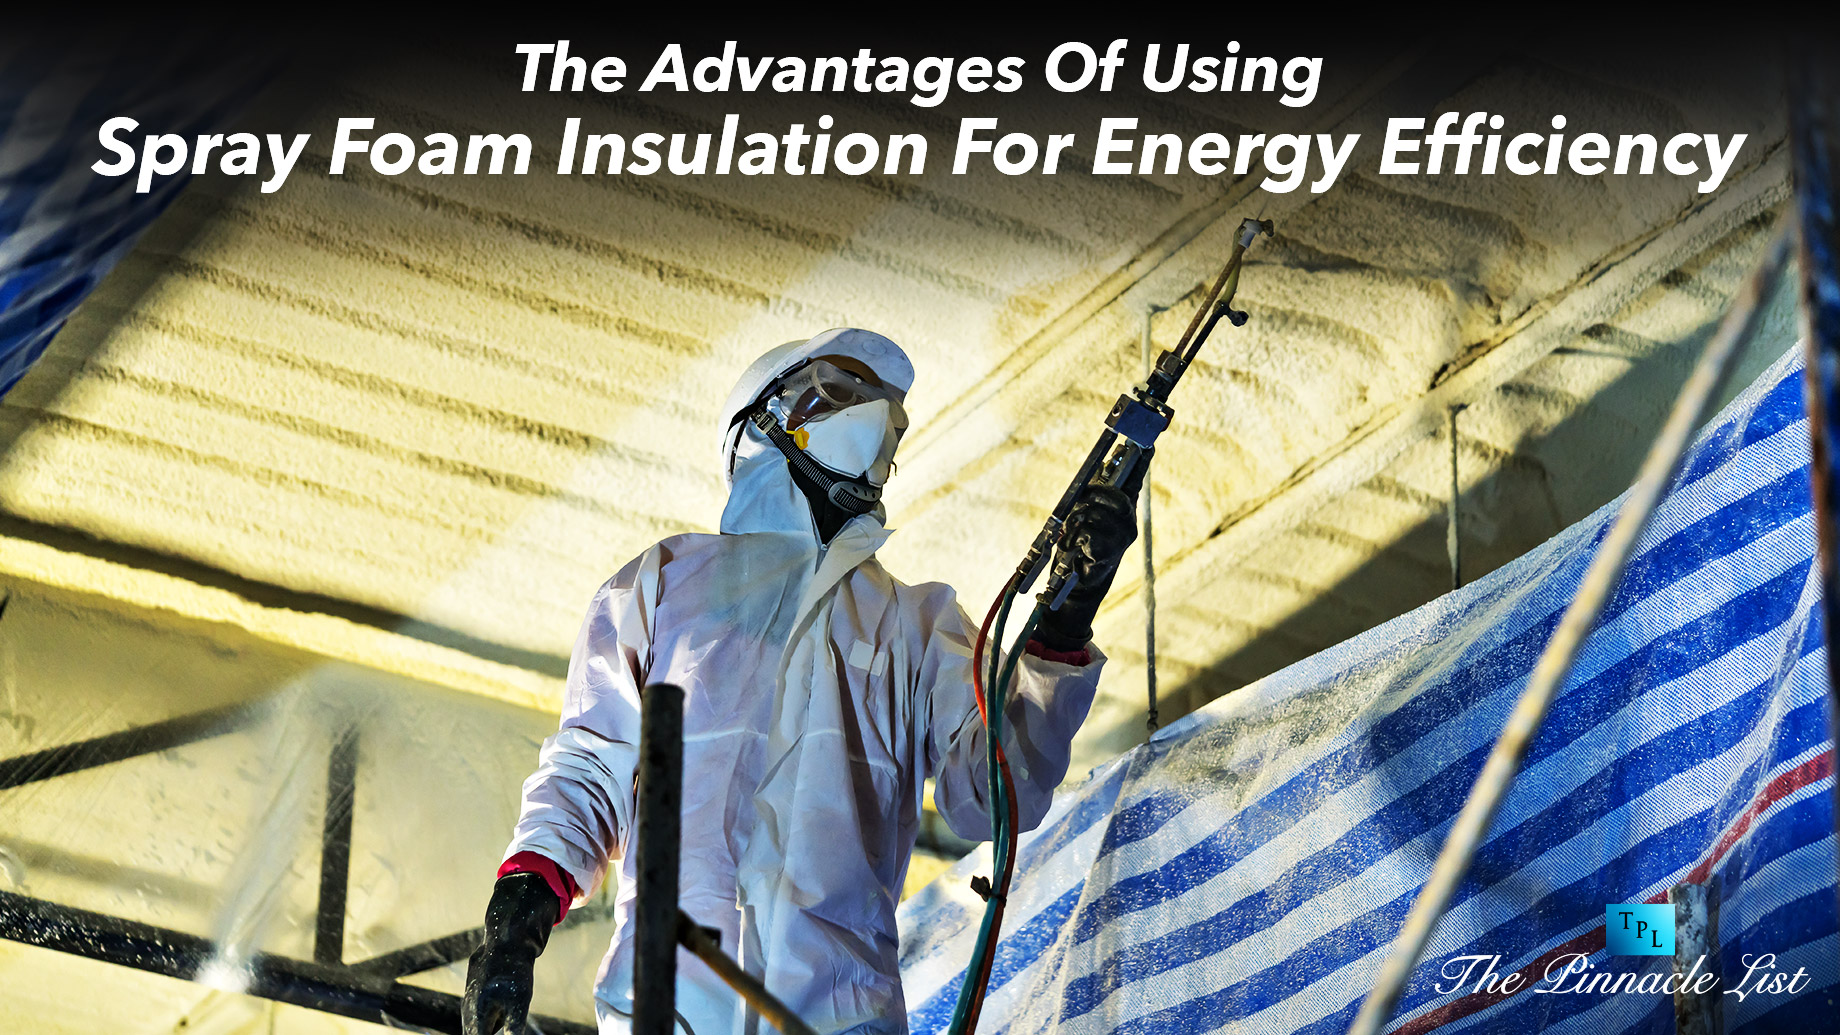 The Advantages Of Using Spray Foam Insulation For Energy Efficiency